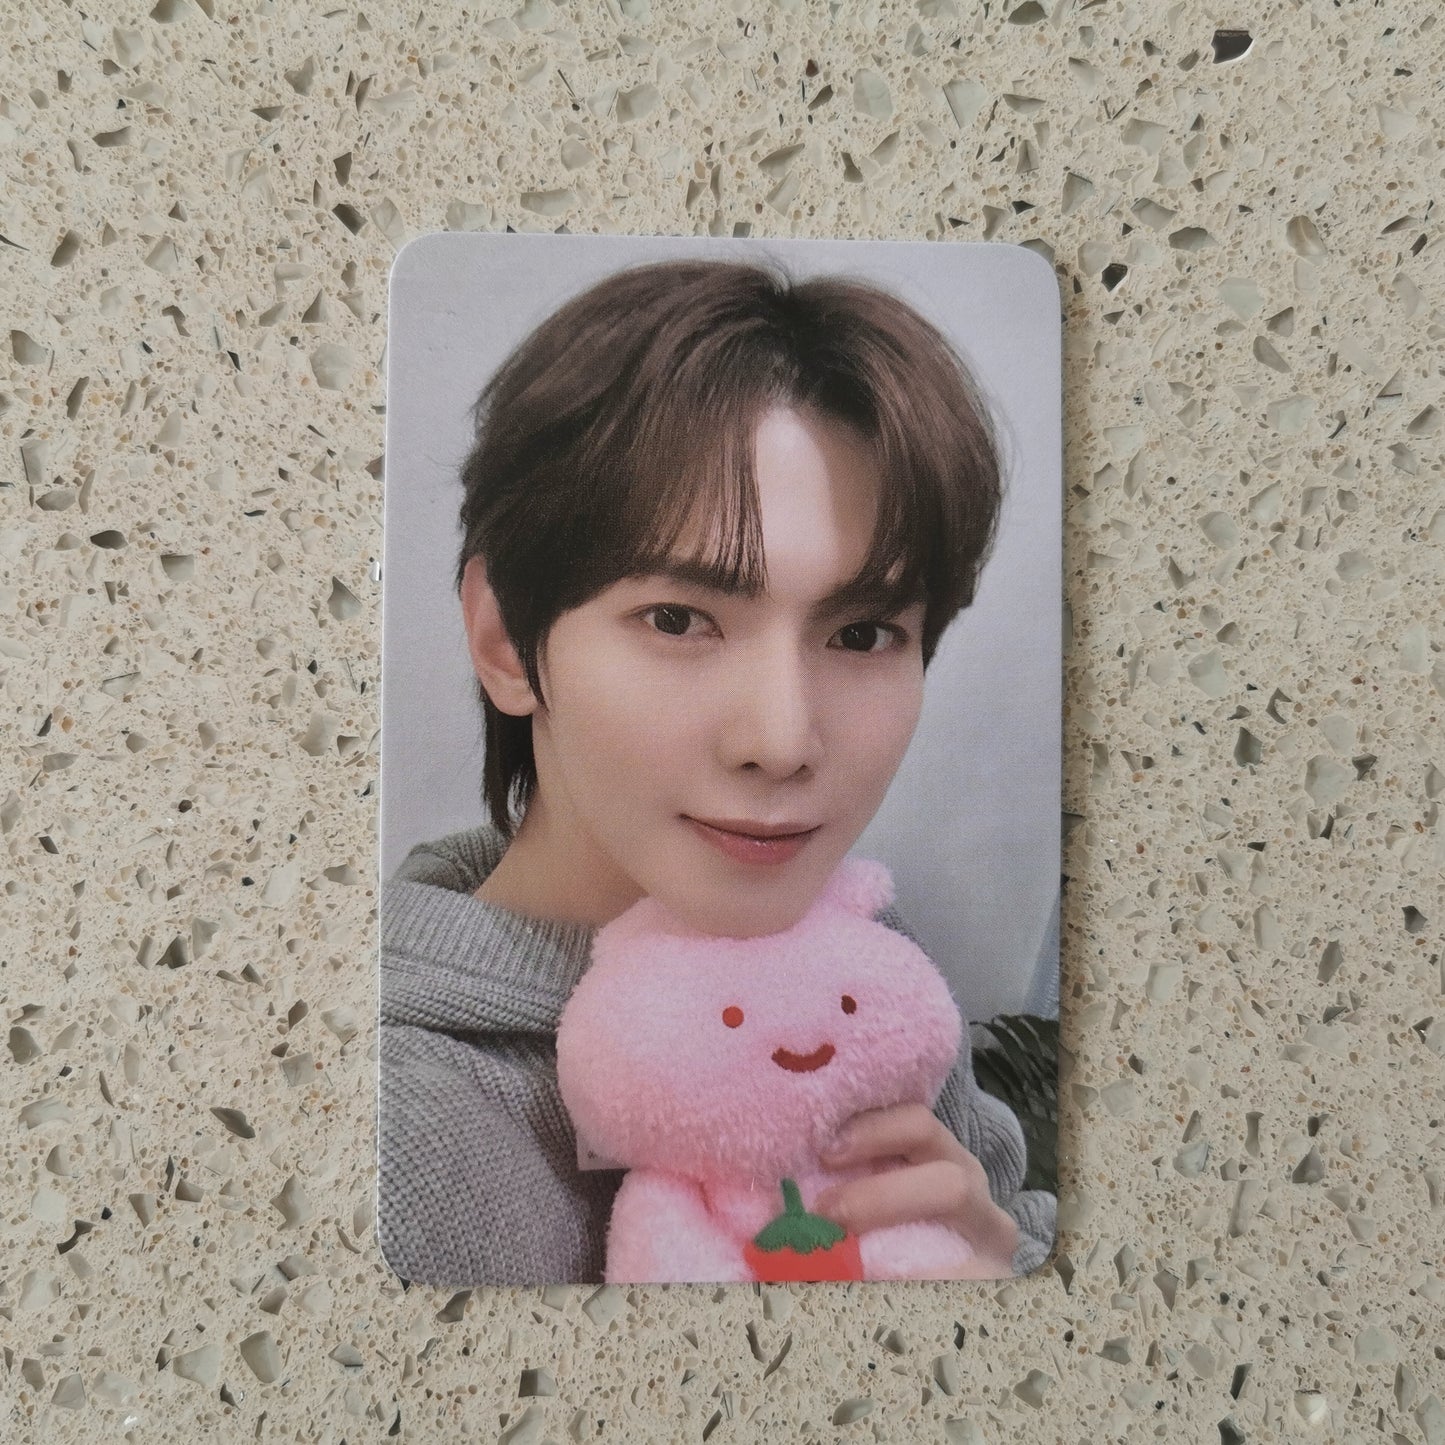 ATEEZ - THE WORLD EP.2: WILL EVERLINE LUCKY DRAW PHOTOCARDS (PINK PLUSHIE VER.)